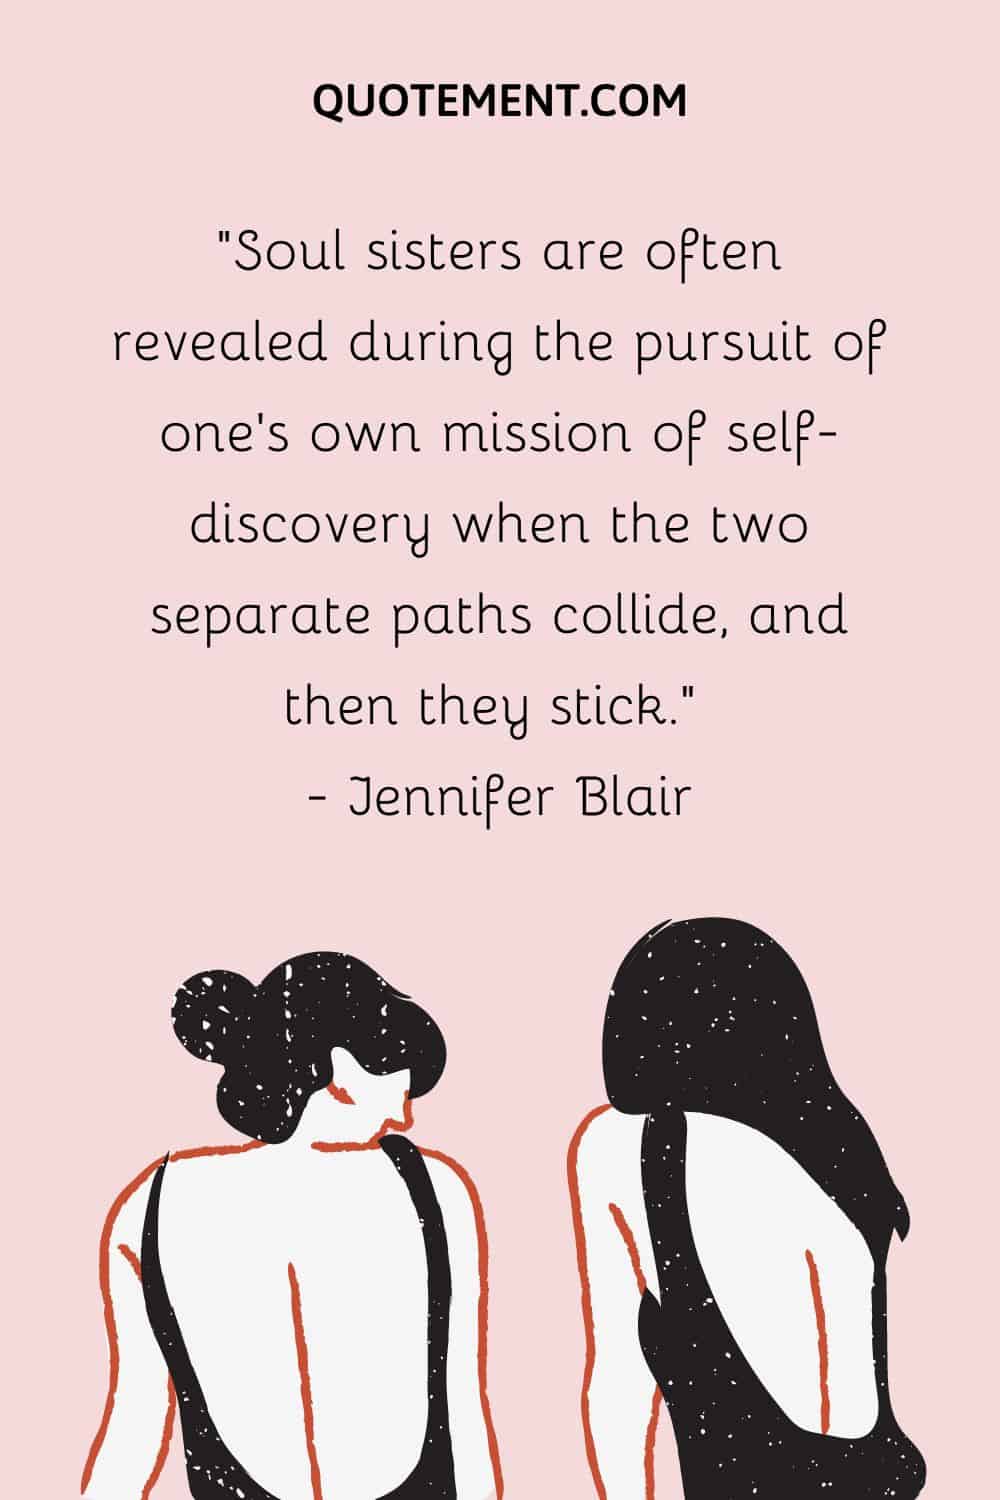 Soul sisters are often revealed during the pursuit of one's own mission of self-discovery